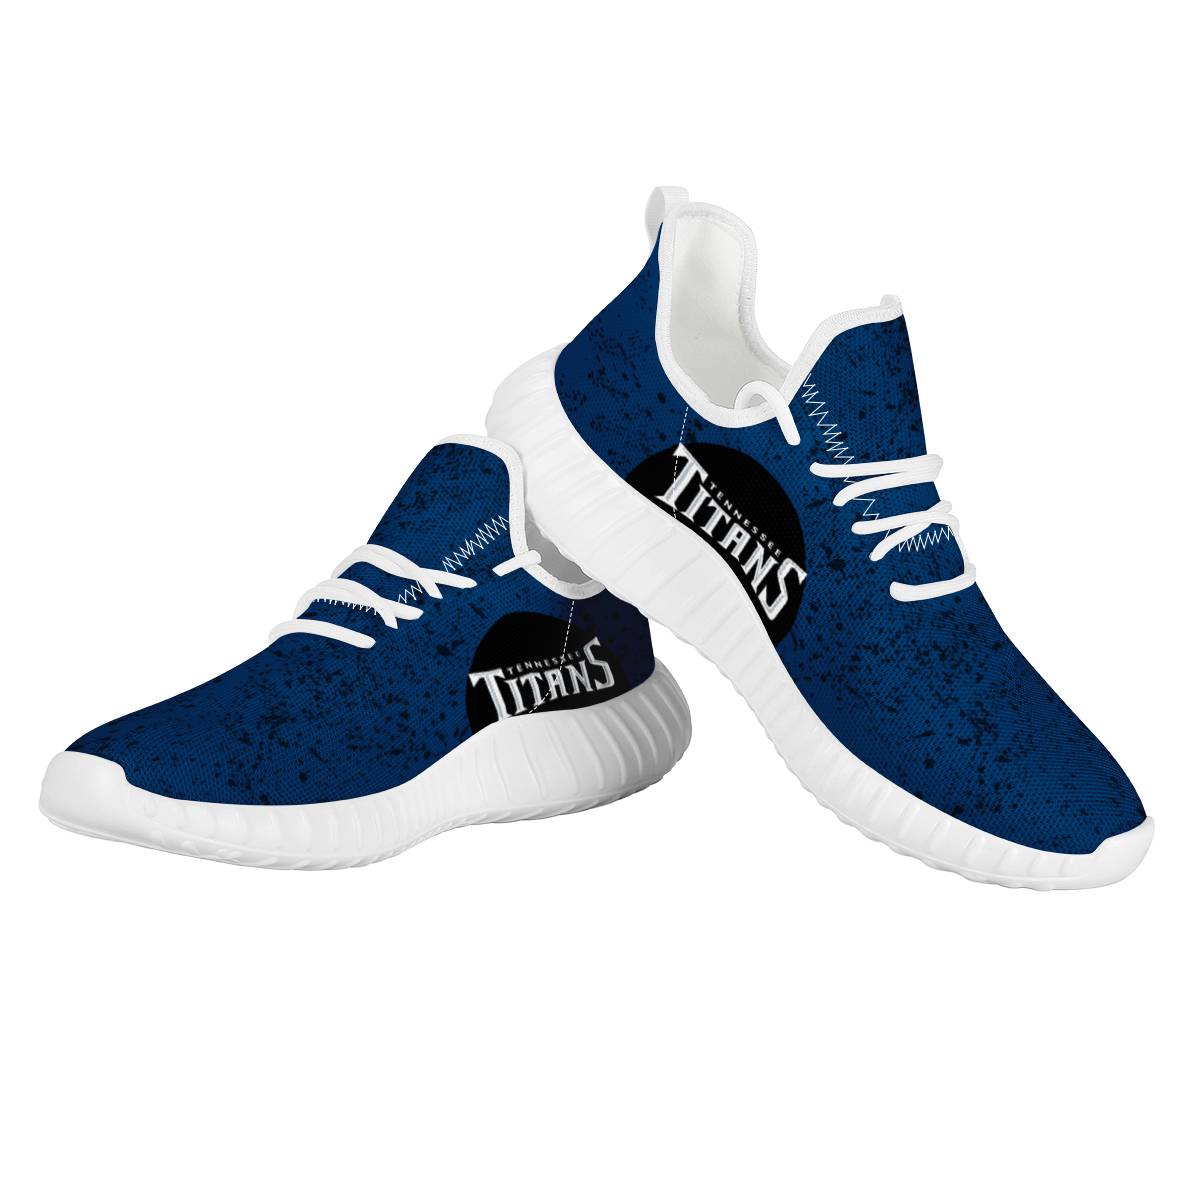 Women's Tennessee Titans Mesh Knit Sneakers/Shoes 006